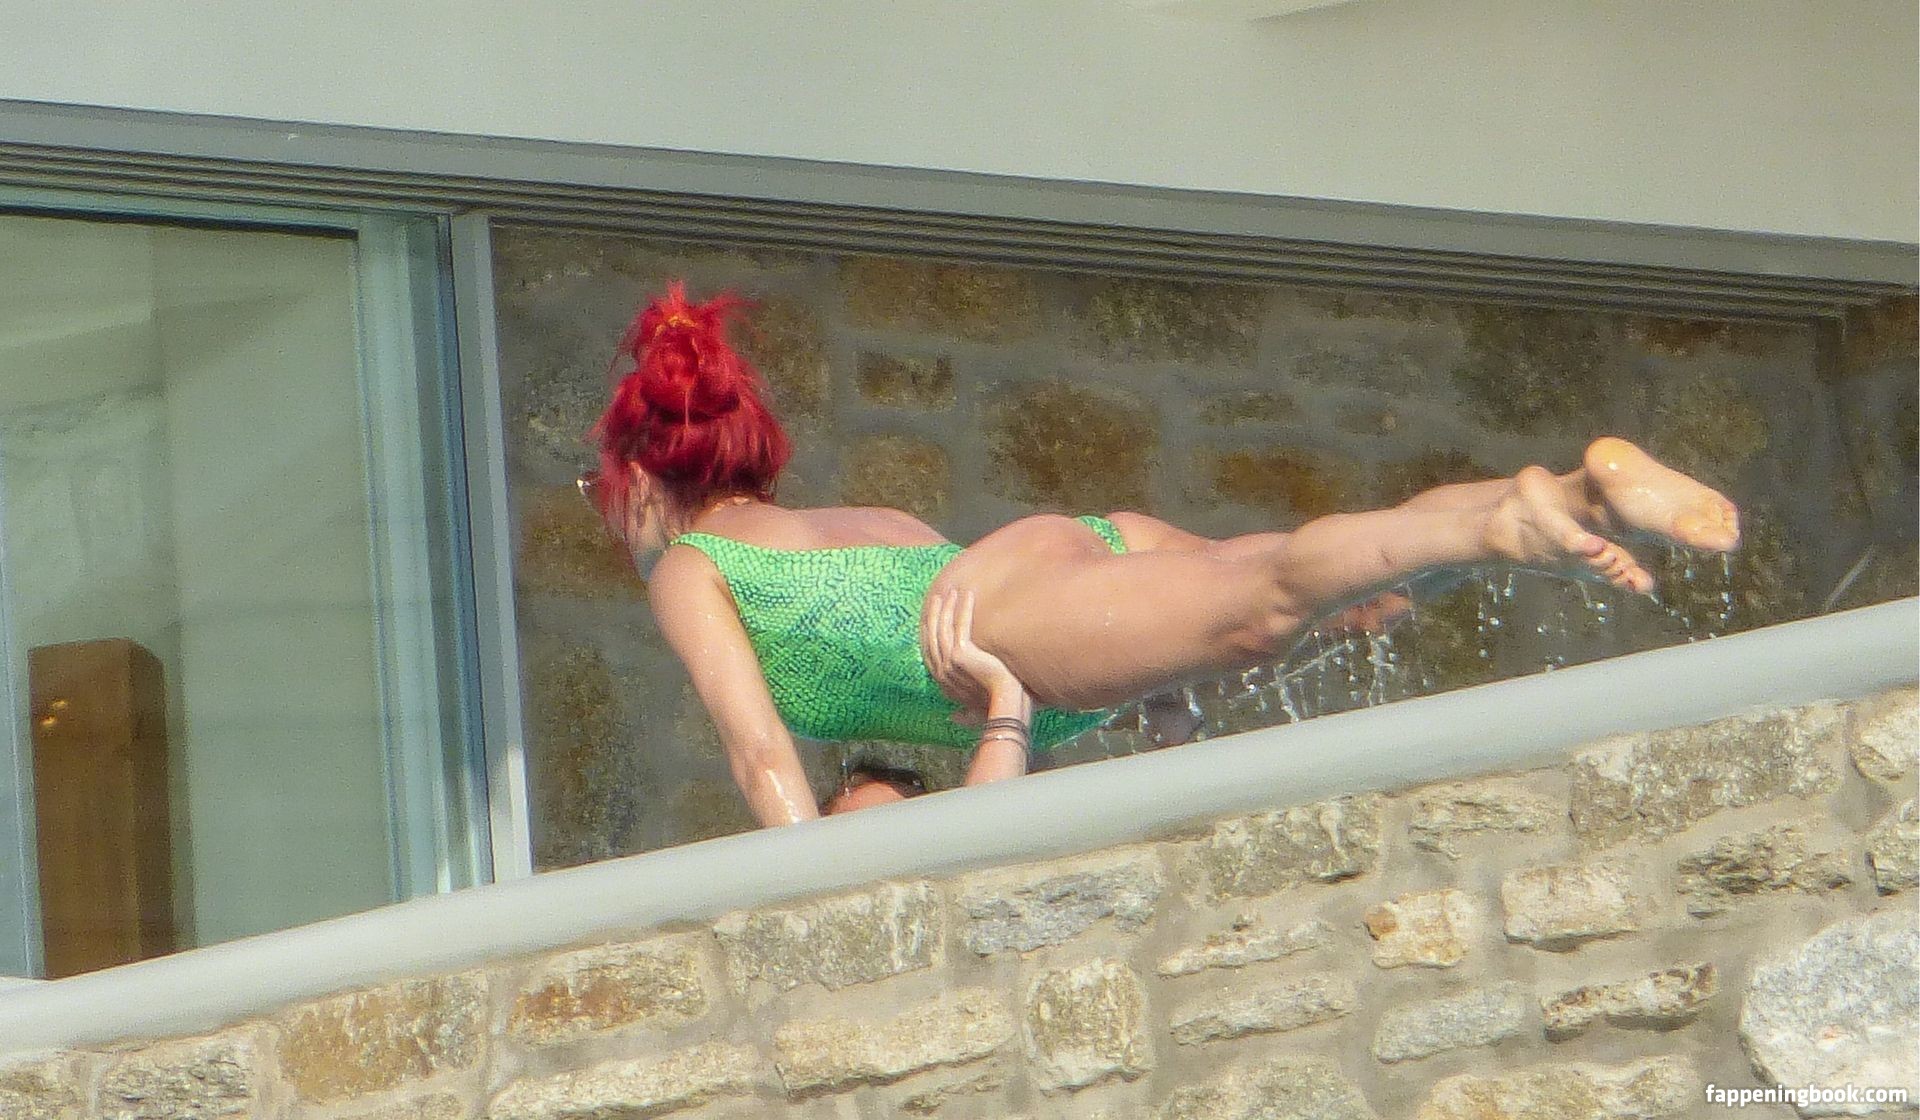 Dianne Buswell Nude Photos. 